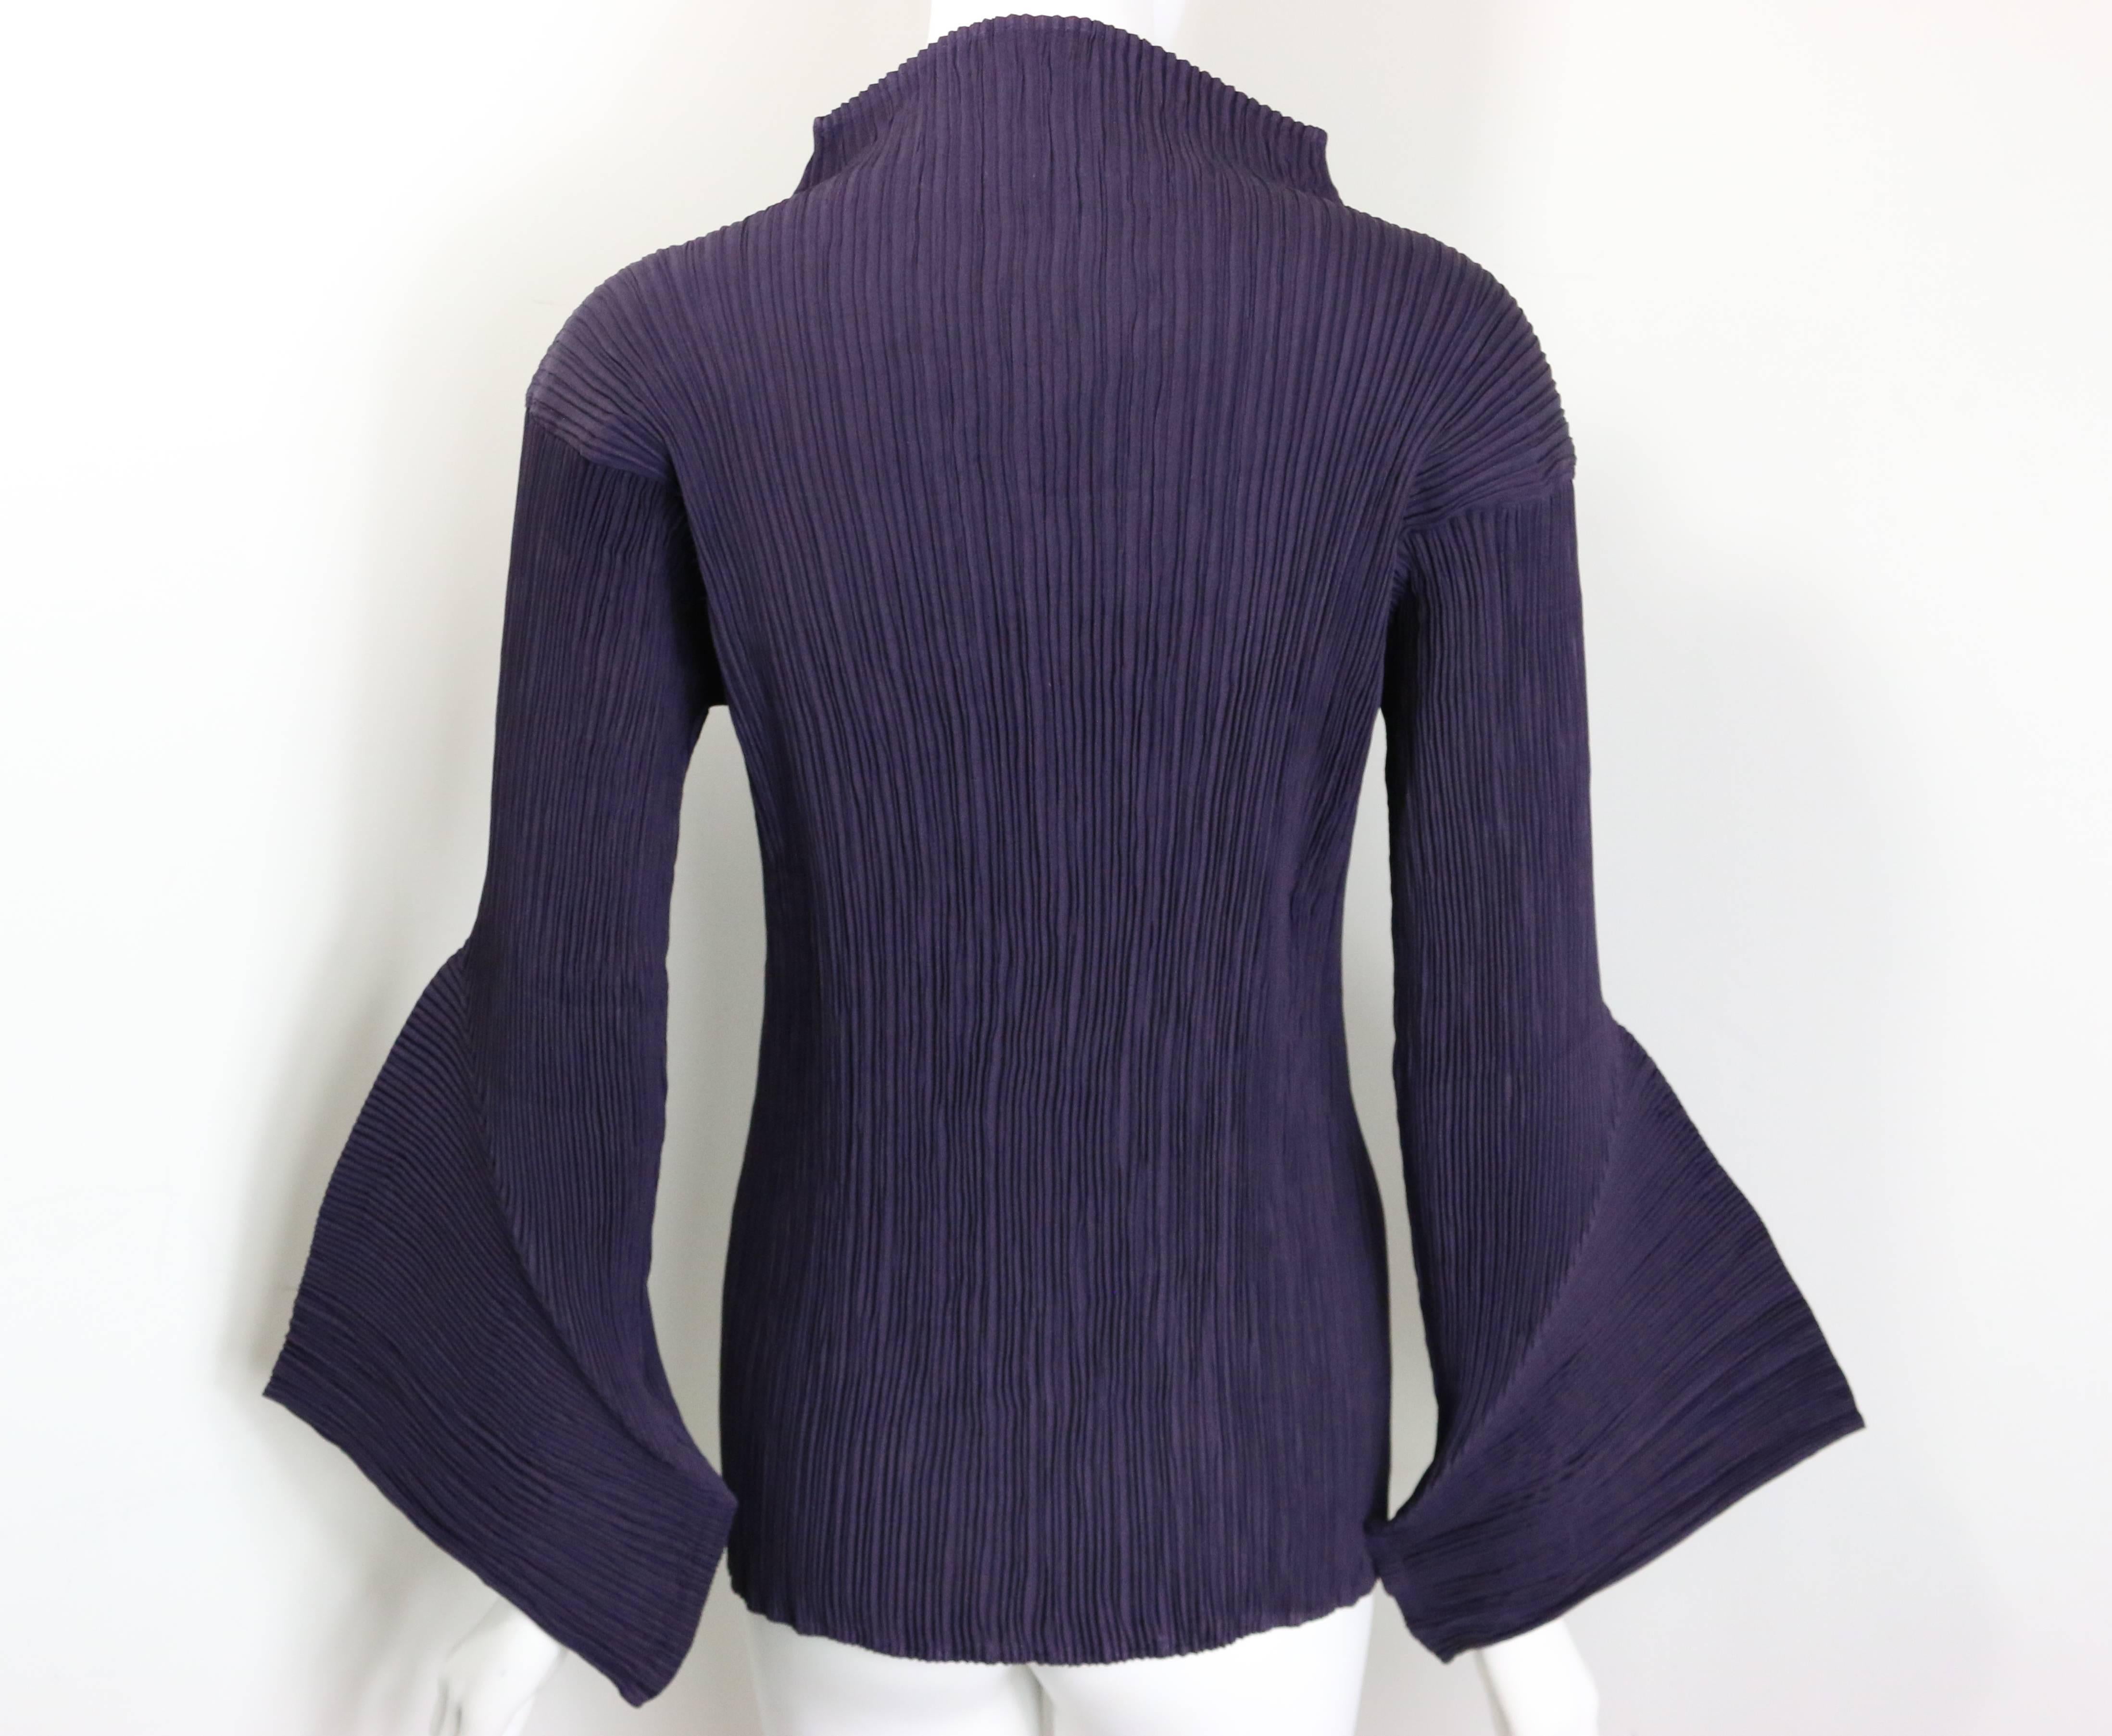 - Vintage 90s Issey Miyake purple pleated high neckline with 3D sleeves top. This piece is one of a kind with sculptural sleeves which is signature for Issey Miyake!!! 

- Made in Japan. 

- Size M. 

- 100% Polyester. 

